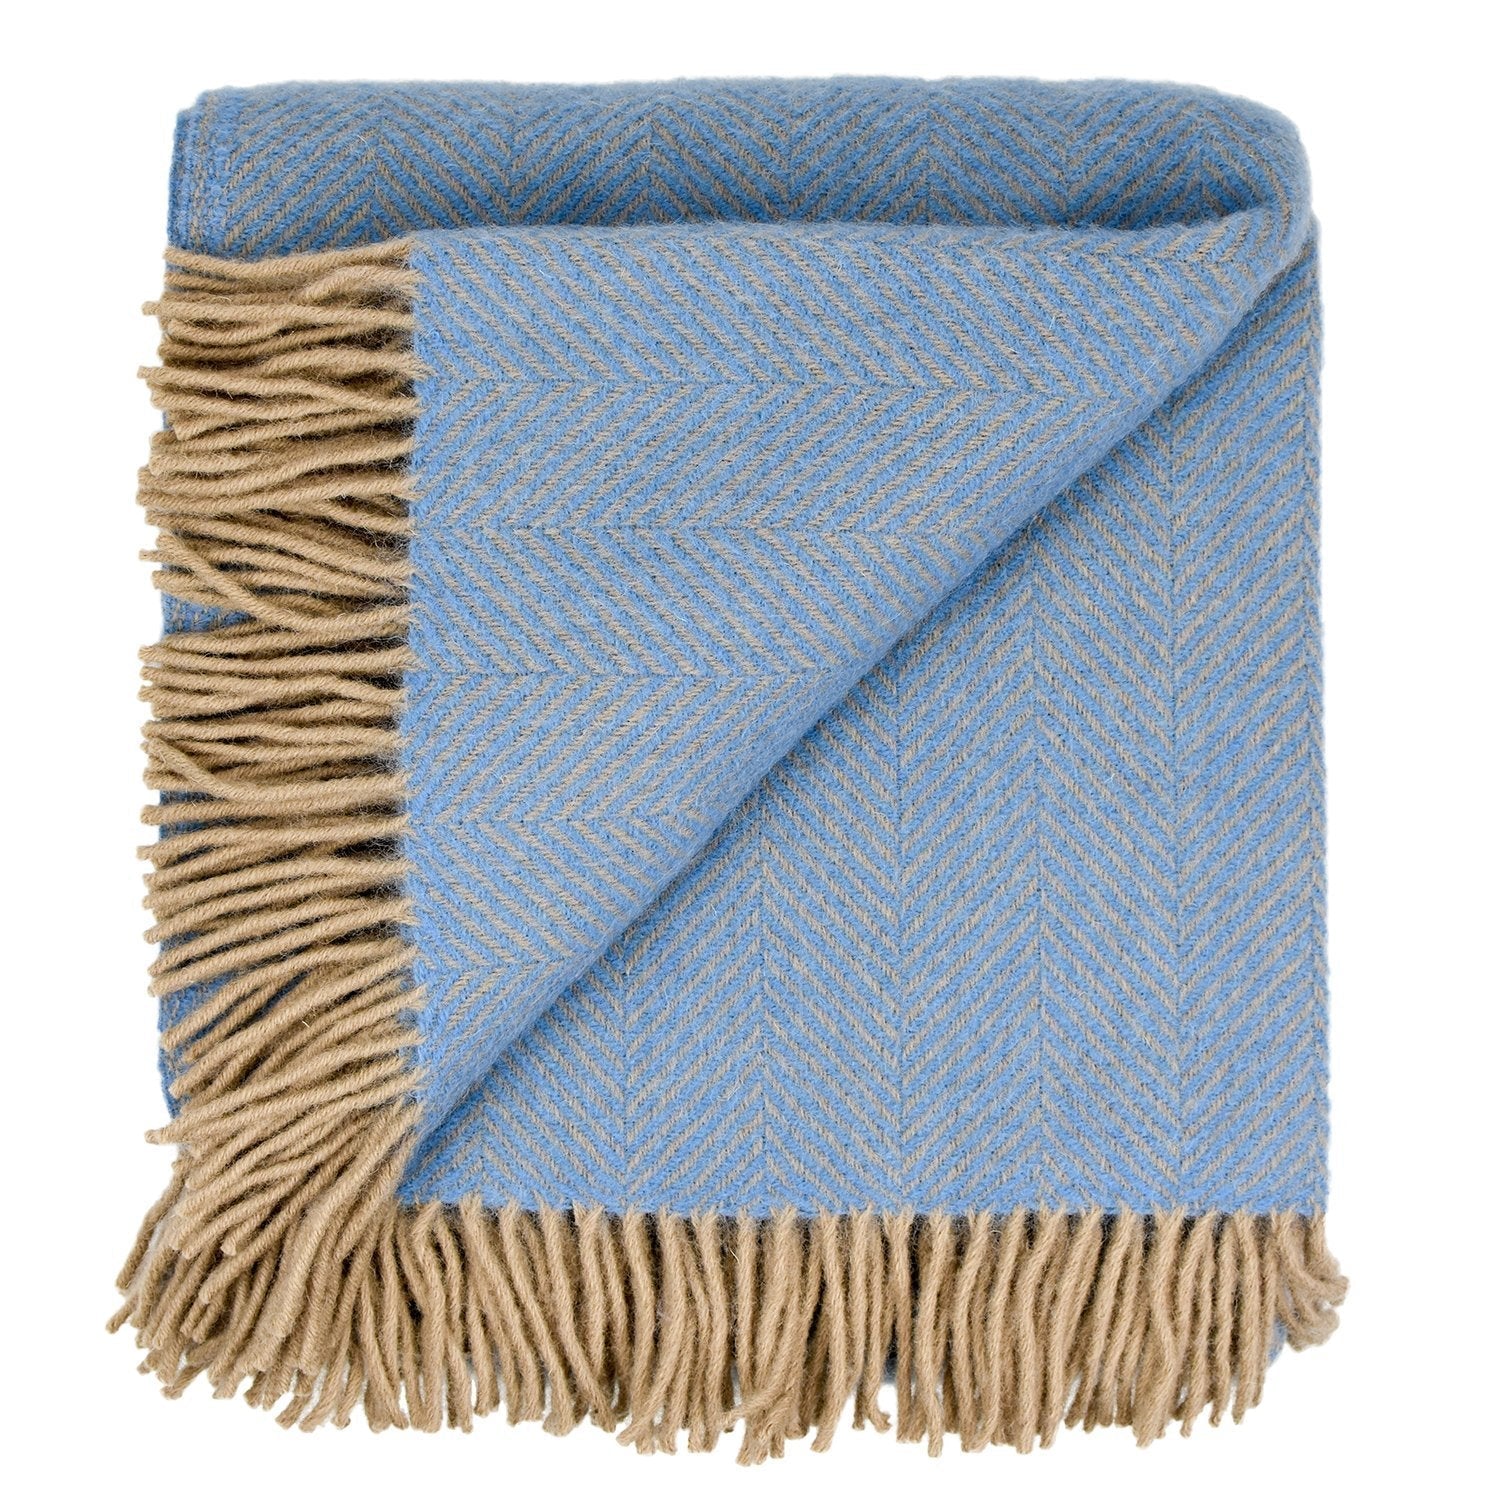 Highland Tweed Herringbone Pure New Wool Throw ~ Peconic Blue ~-Throws and Blankets-Prince of Scots-00810032750152-K4050030-012-Prince of Scots